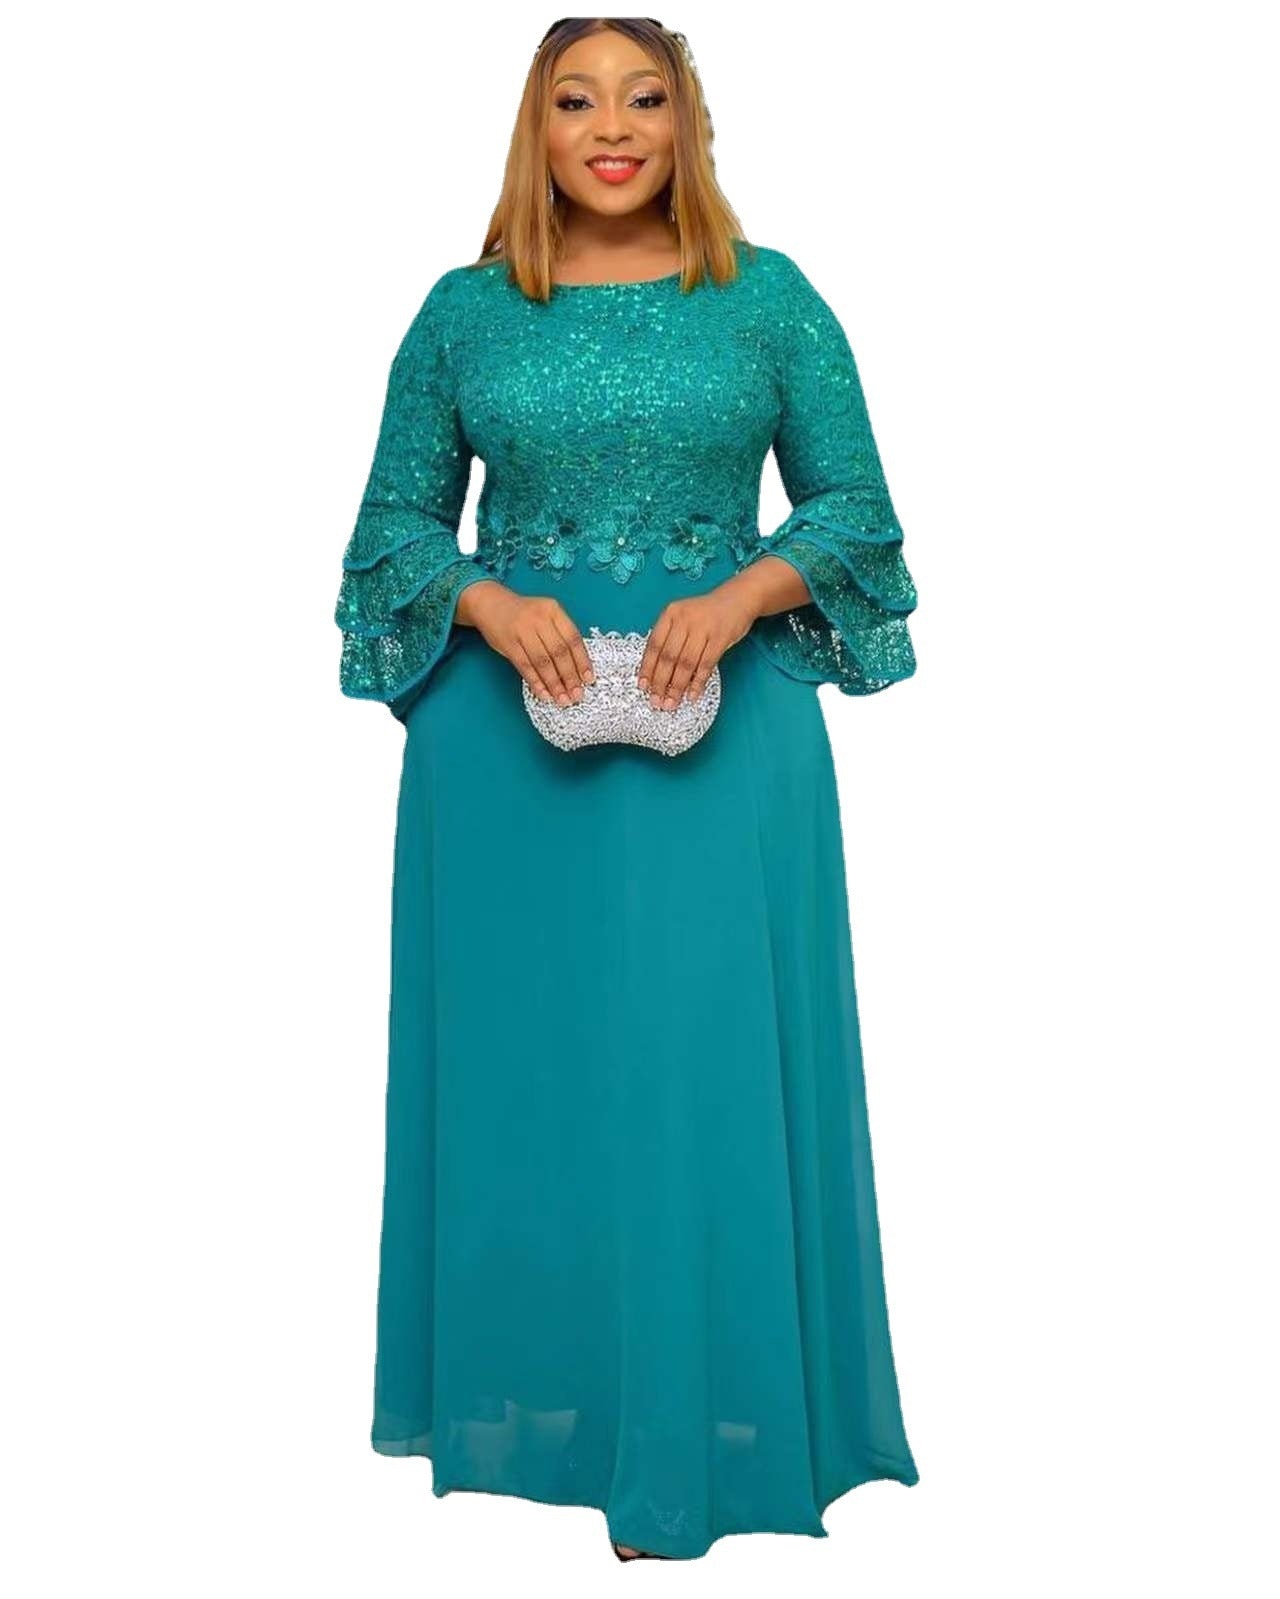 Elegant African Maxi Dress: Three-Quarter Sleeves, Solid Colors, and Flowing Polyester Fabric - Flexi Africa - Free Delivery